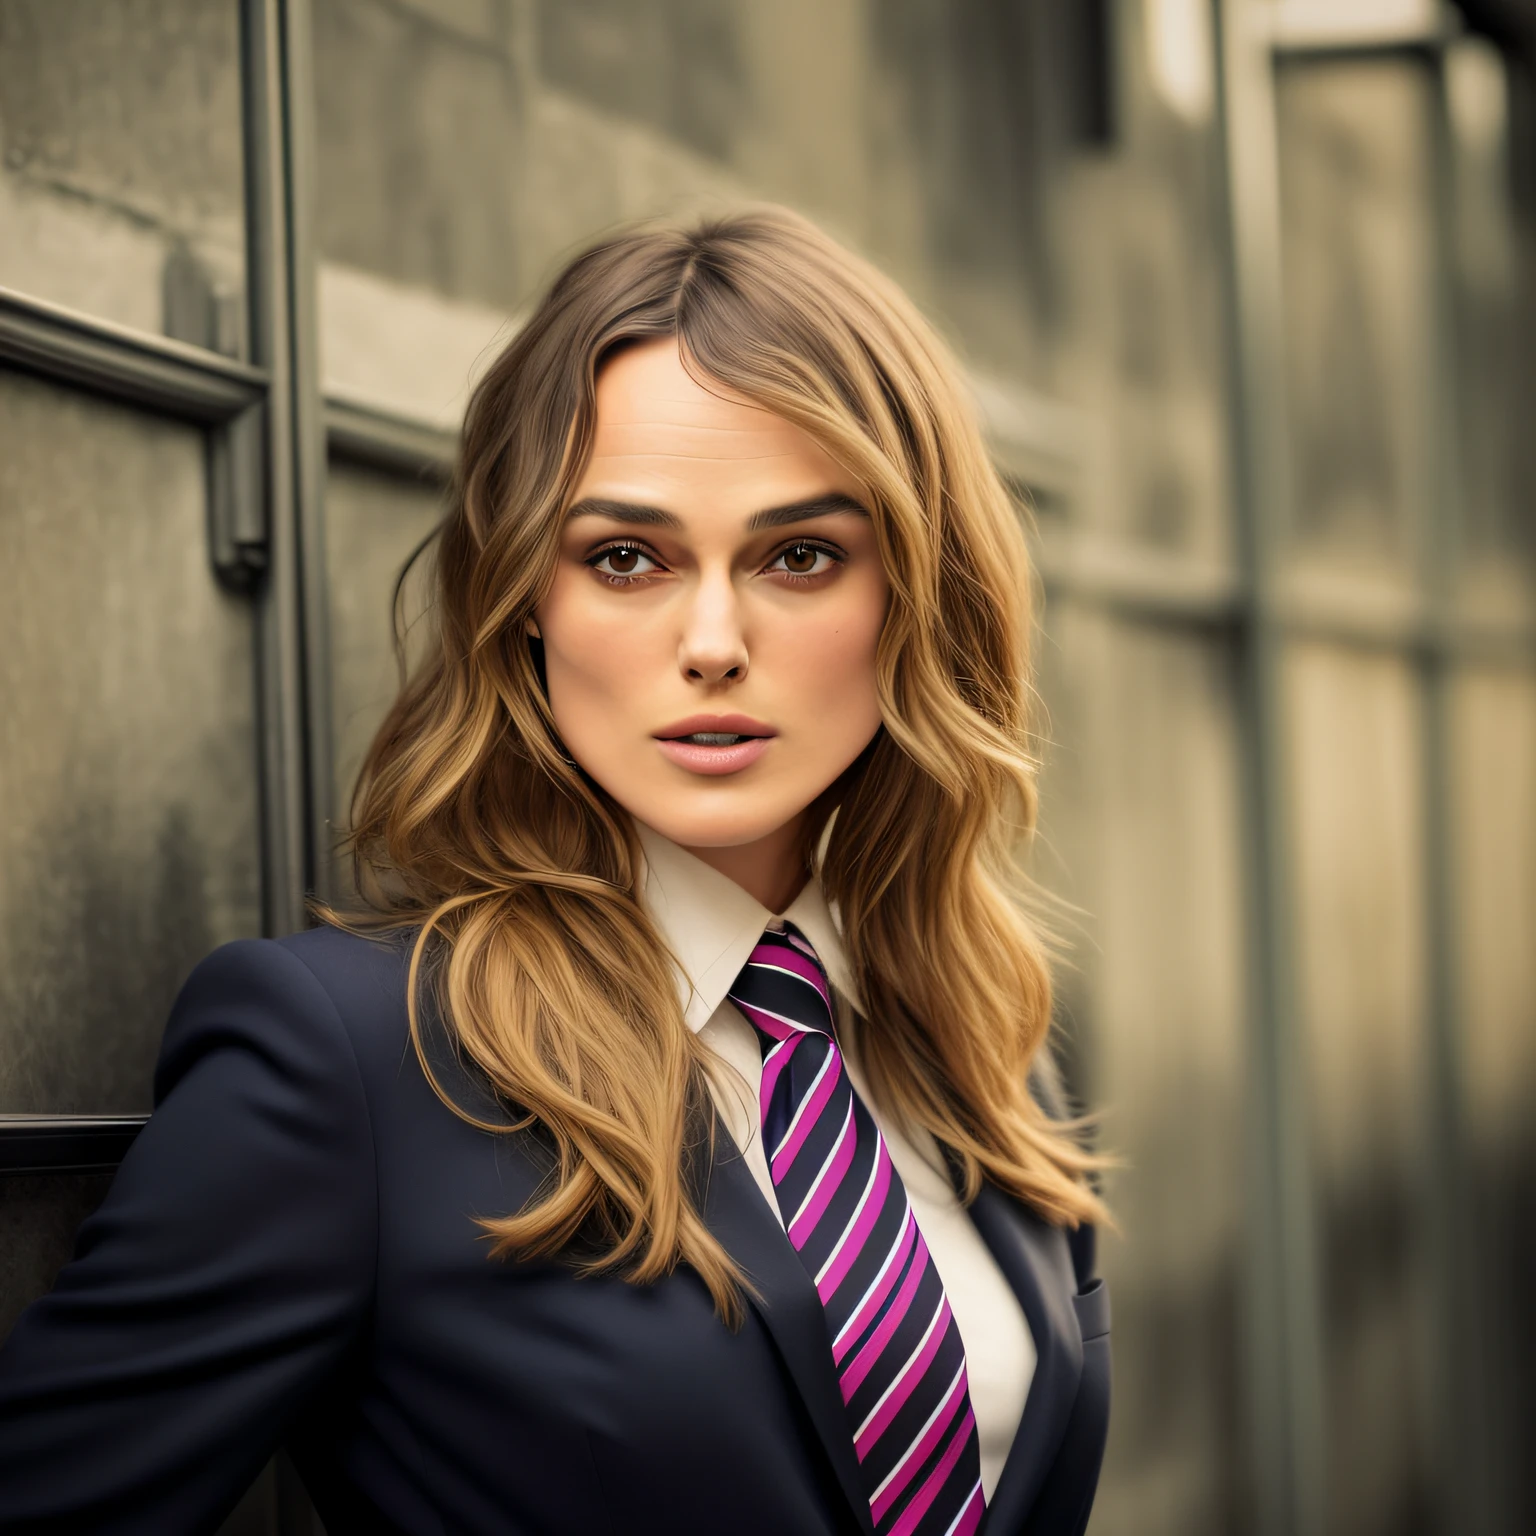 Keira Knightley in a 정장 and tie leaning against a wall, girl in 정장, girl in a 정장, wearing a strict business 정장, in strict 정장, wearing 정장 and tie, woman in business 정장, wearing a 정장 and a tie, wearing a 정장 and tie, wearing business 정장, in a strict 정장, 정장 ， 완벽한 얼굴, 젊은 비즈니스 우먼